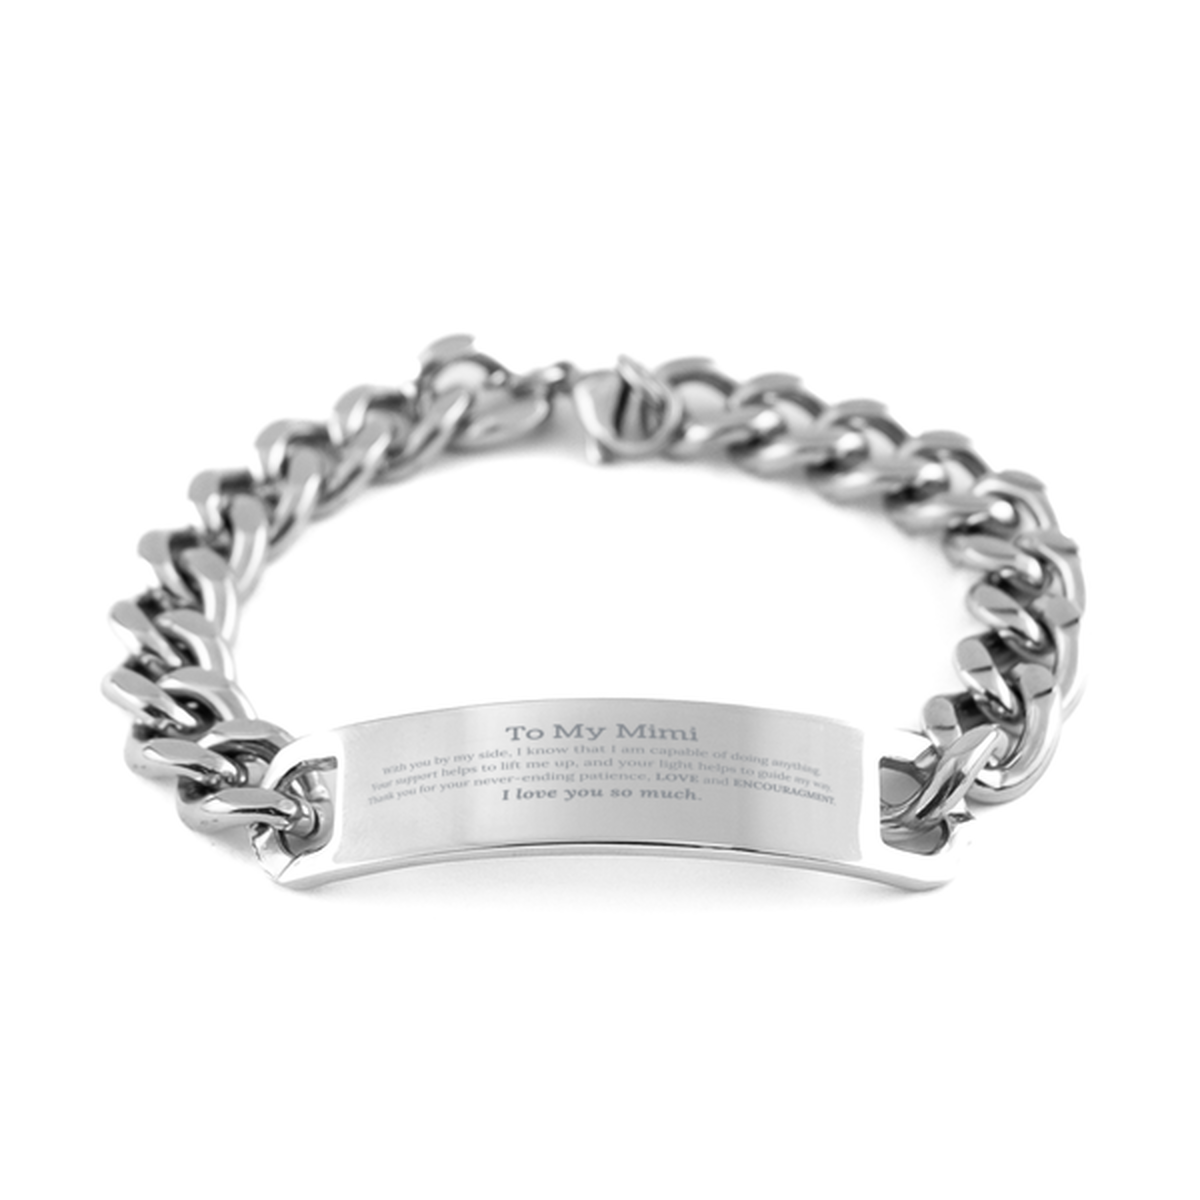 Appreciation Mimi Cuban Chain Stainless Steel Bracelet Gifts, To My Mimi Birthday Christmas Wedding Keepsake Gifts for Mimi With you by my side, I know that I am capable of doing anything. I love you so much